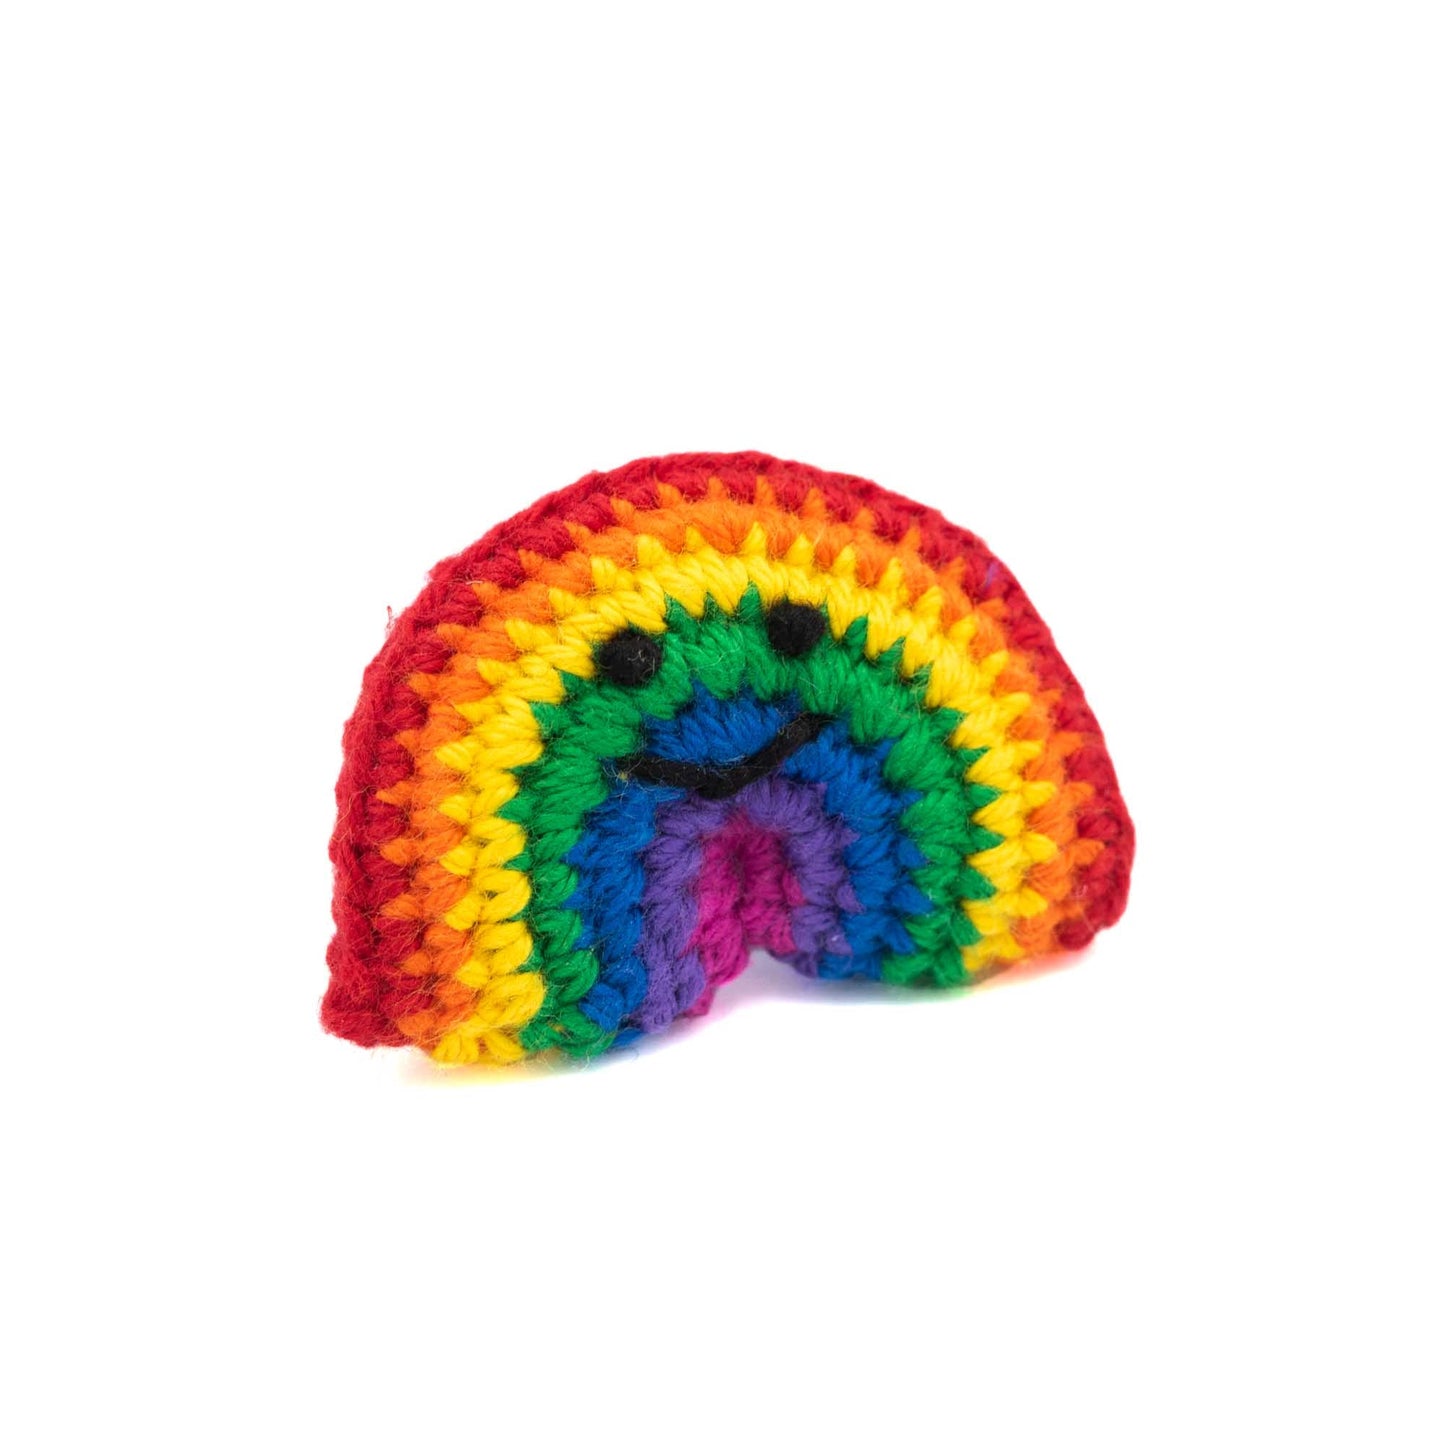 Load image into Gallery viewer, Crochet rainbow brooch with a little smiley face in black thread.
